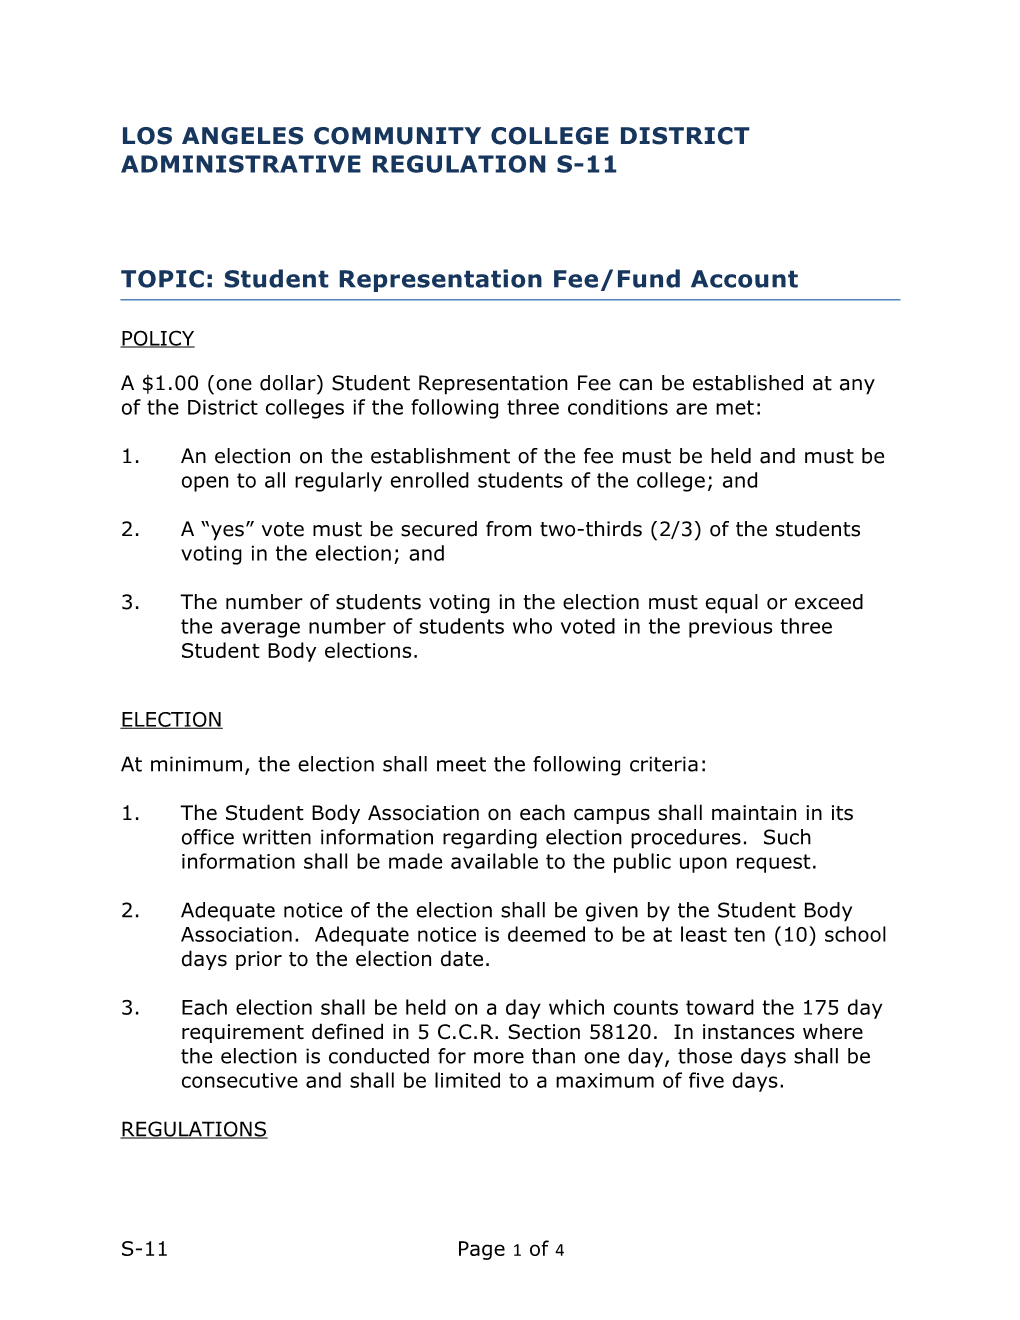 Los Angeles Community College District Administrative Regulation S-11